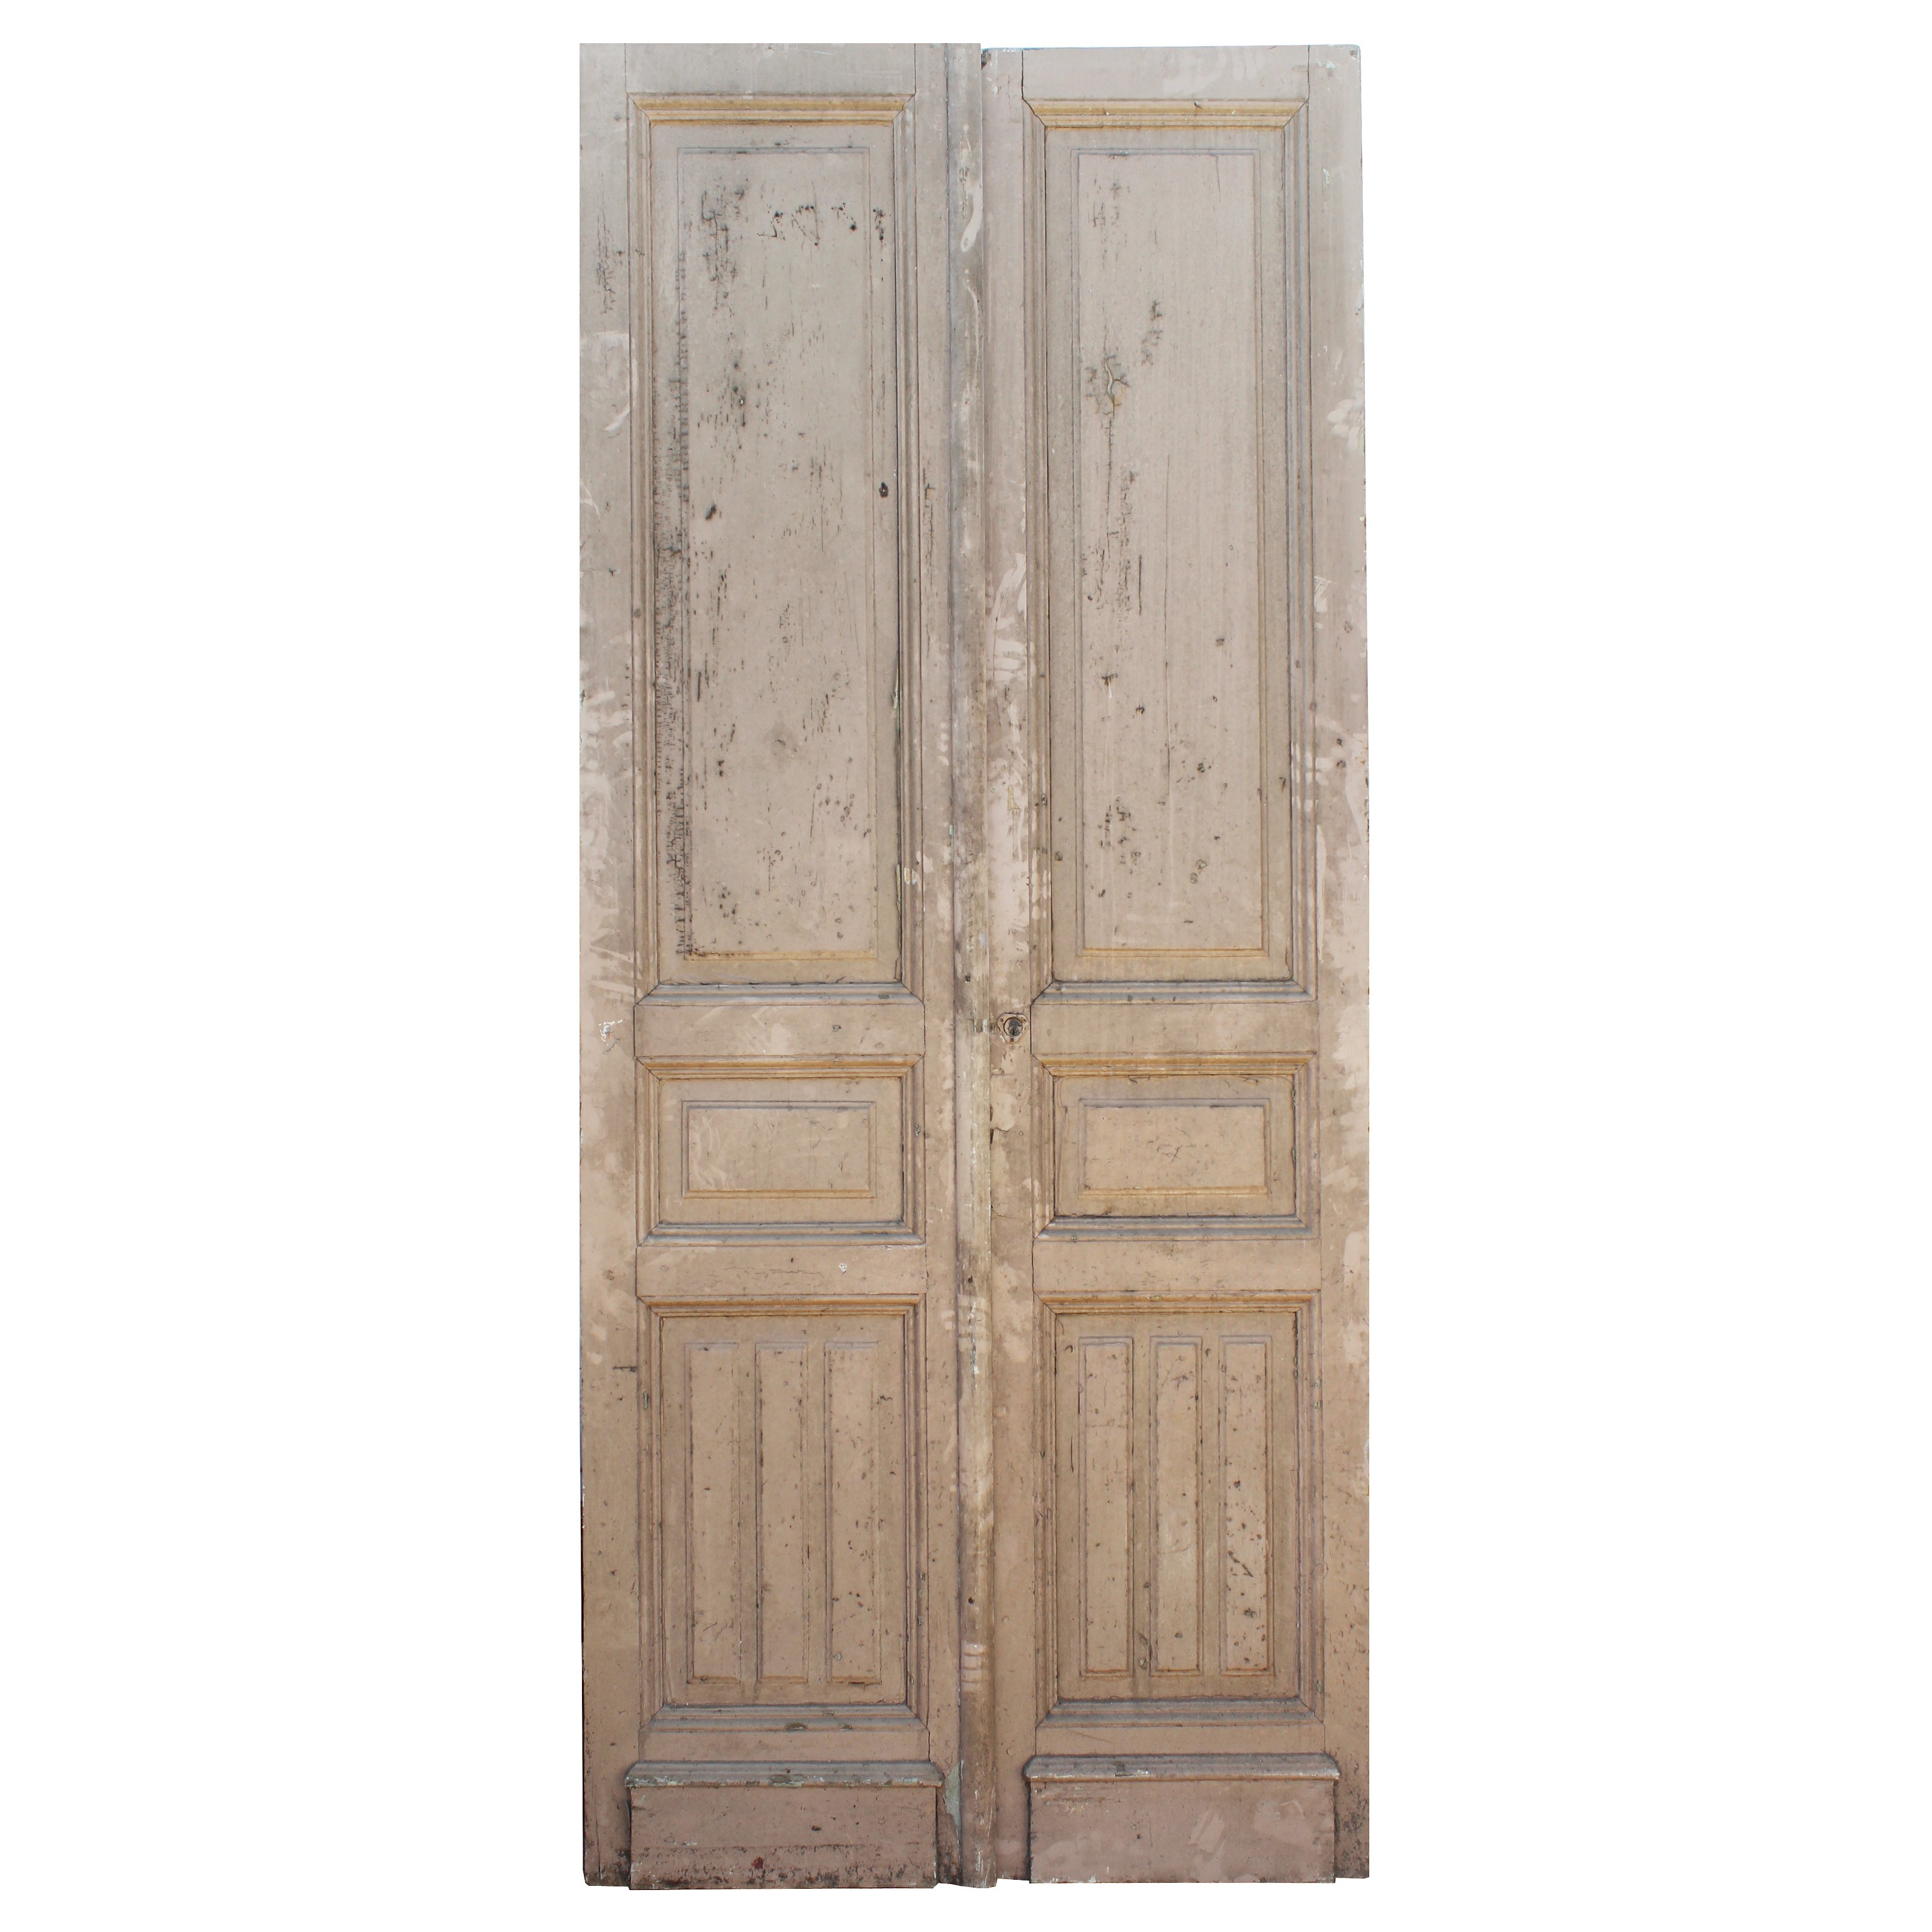 Antique Door Pair from France, 19th Century - Preservation Station ...